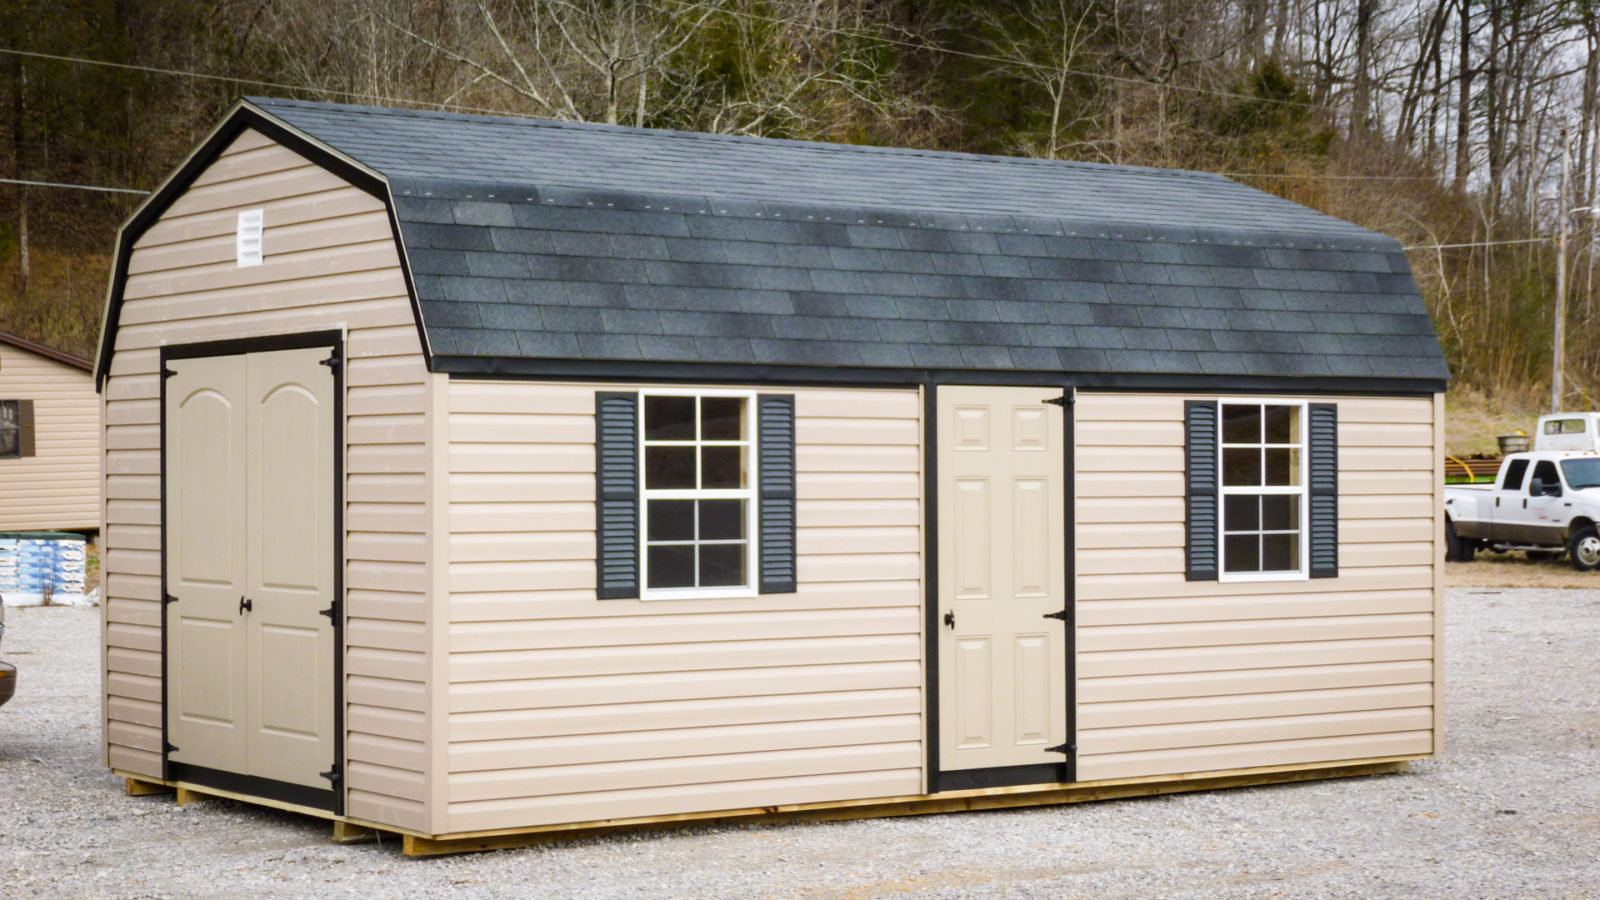 exterior of tan 12x24 in storage building sizes for sale in KY and TN